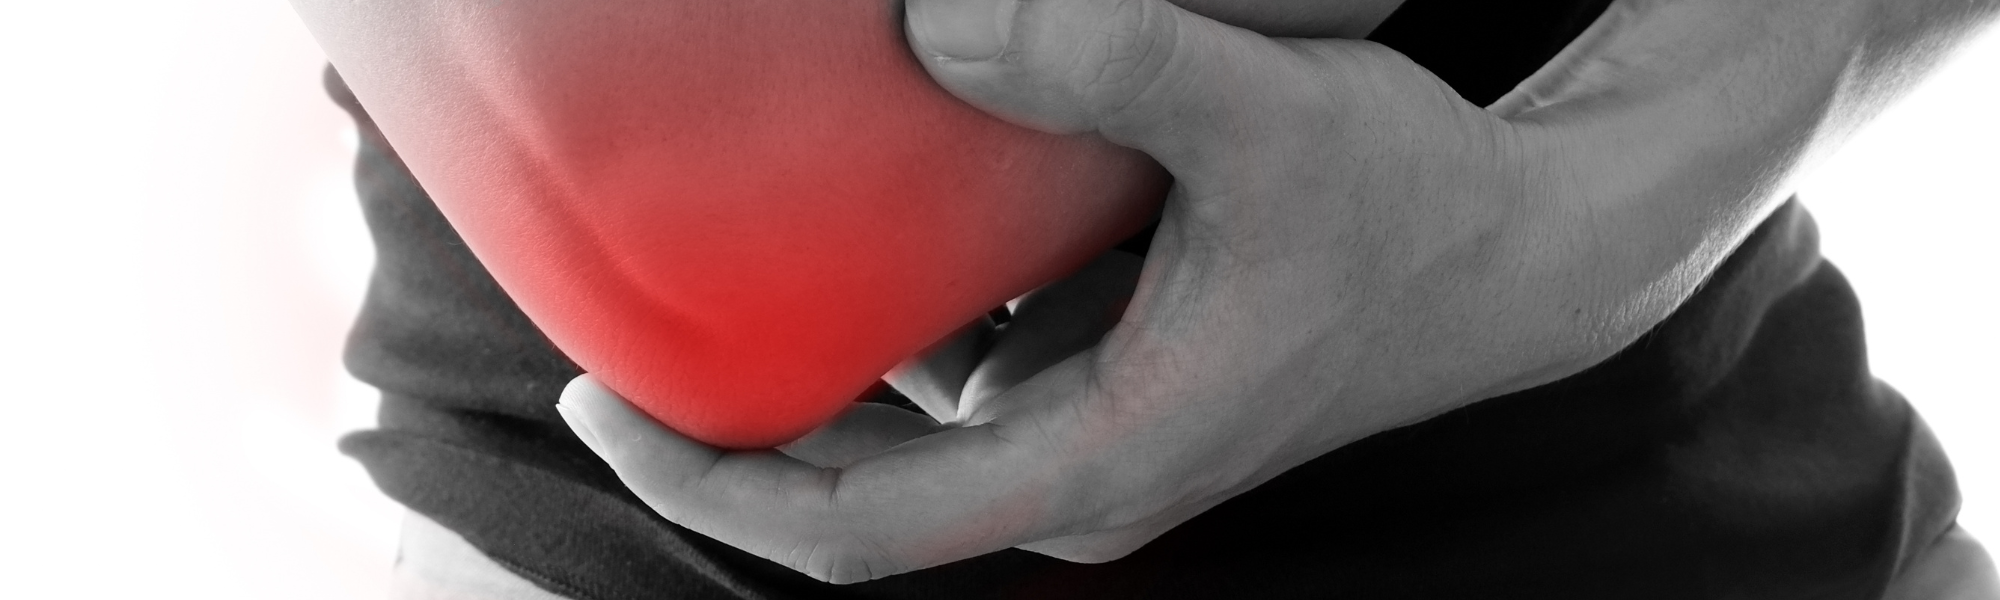 Chiropractic Care for Bursitis: How it Can Help